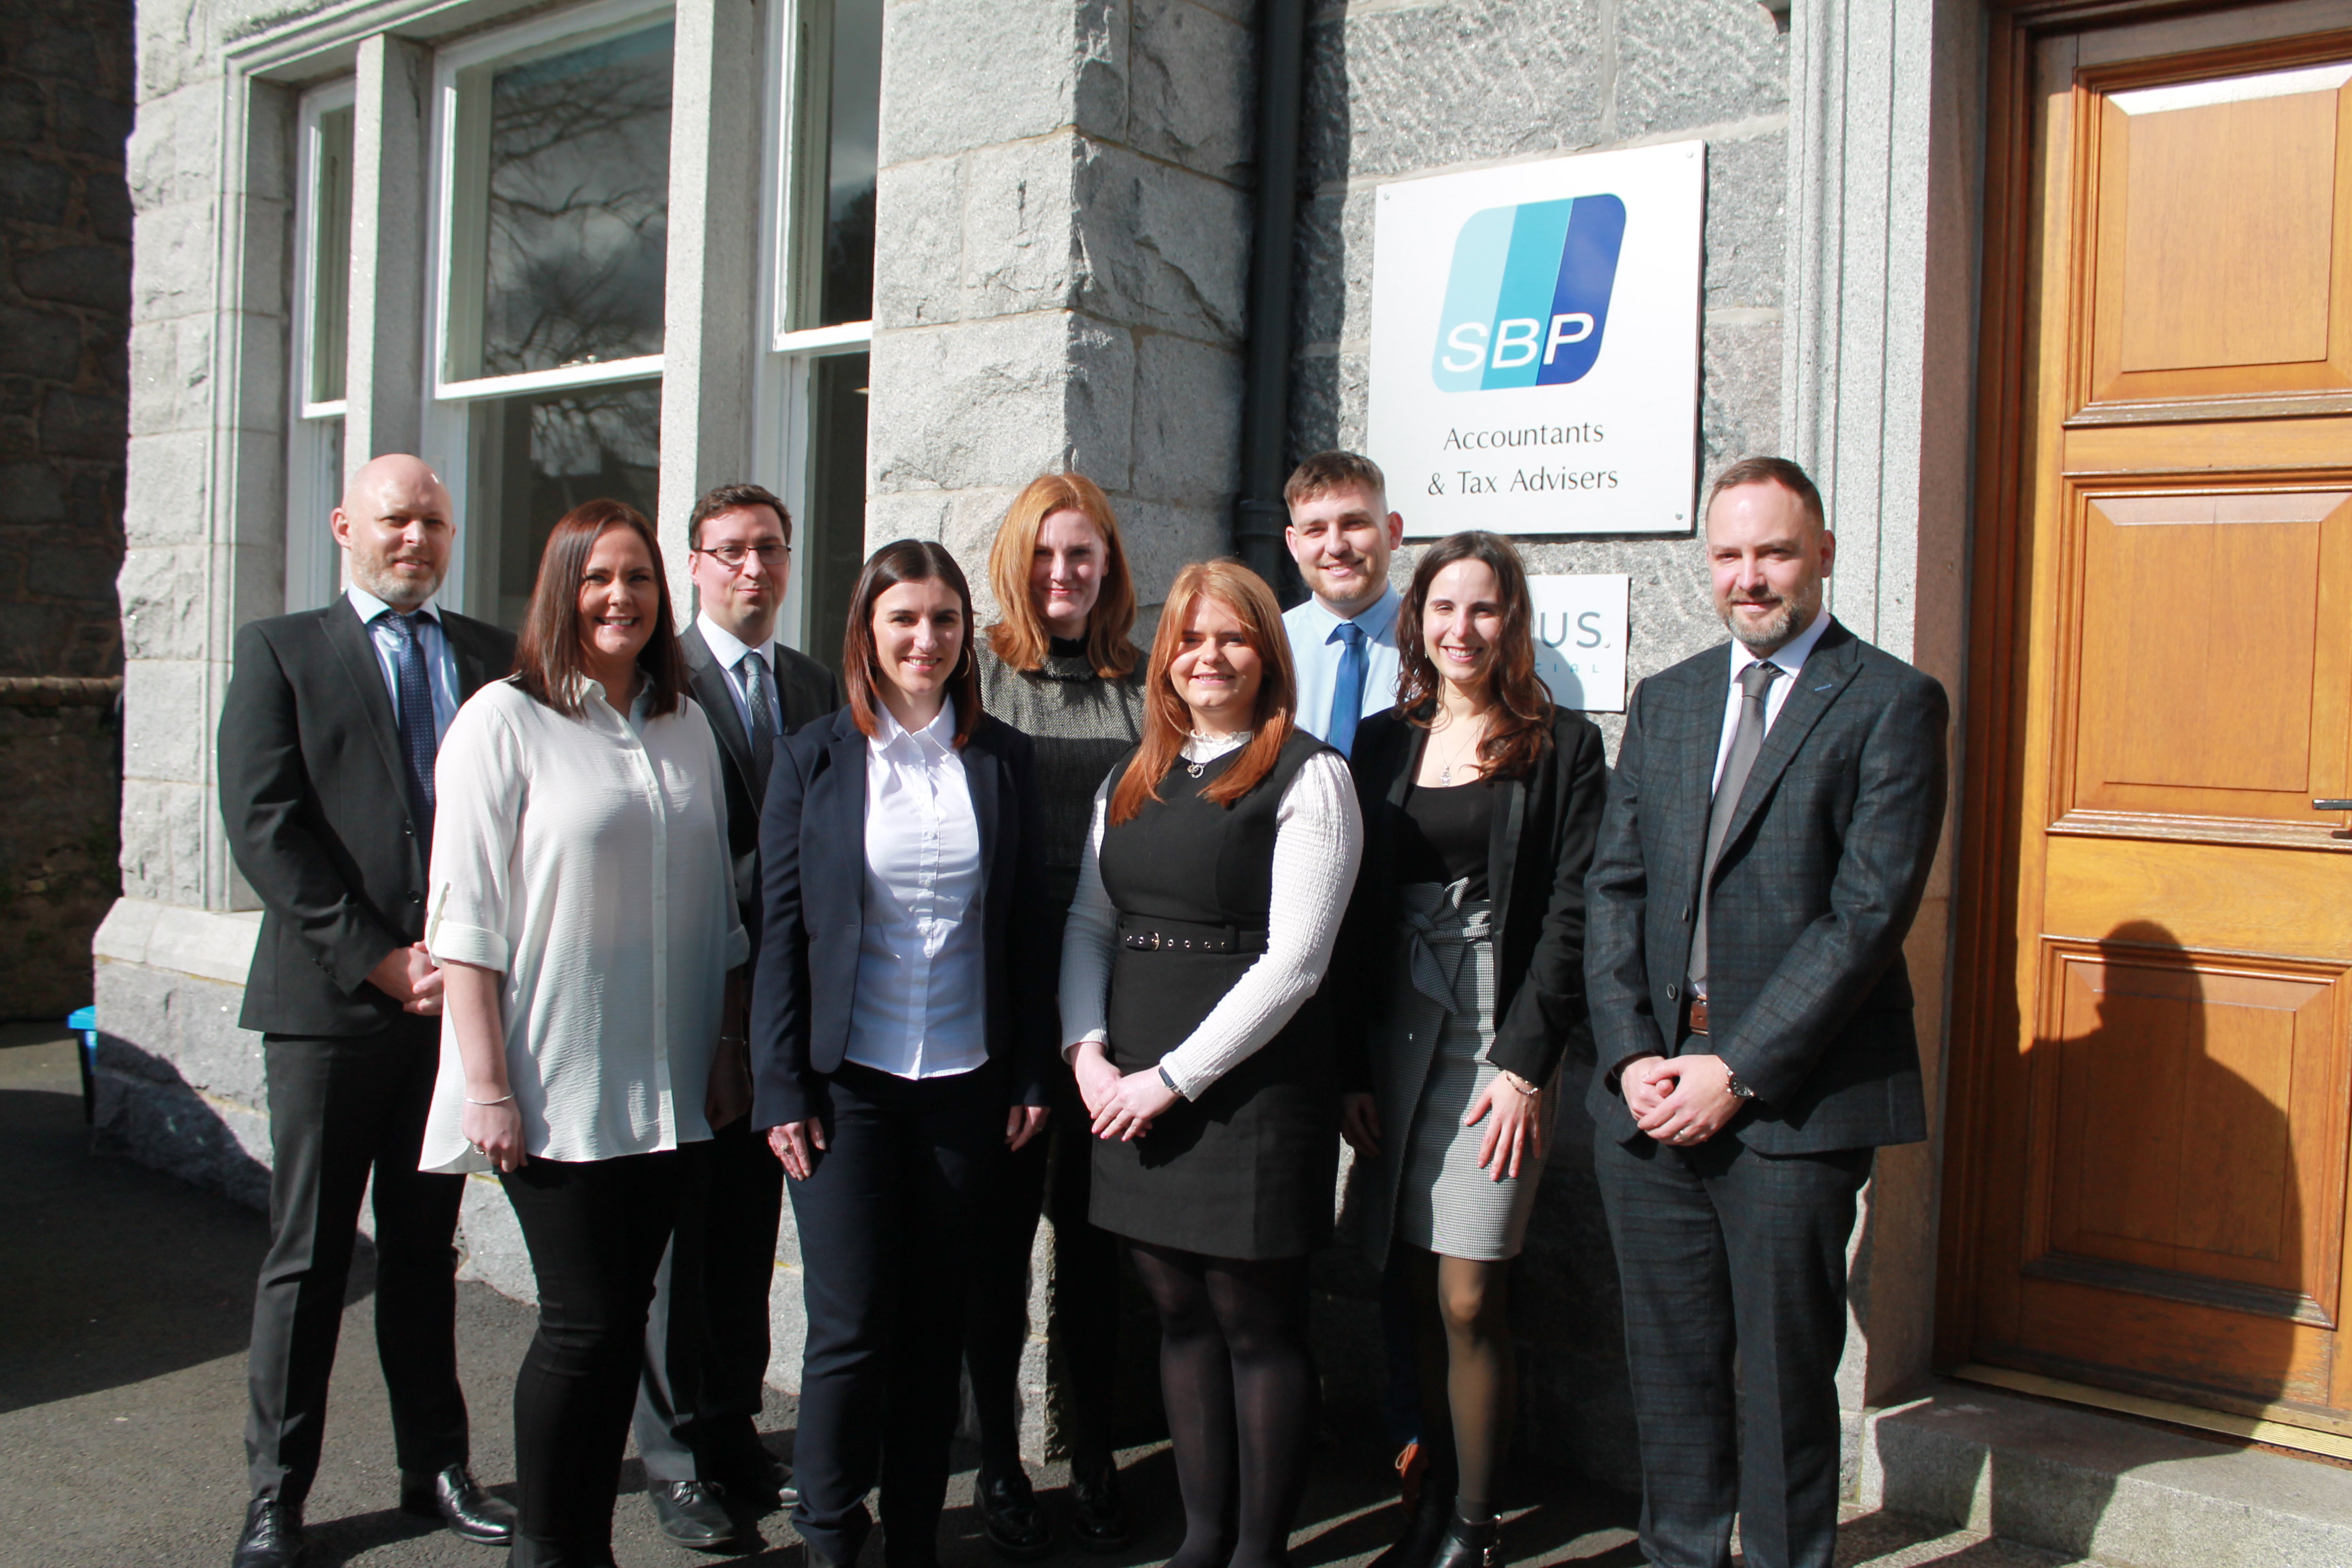 SBP Accountants & Business Advisers announces nine promotions in its Aberdeen office